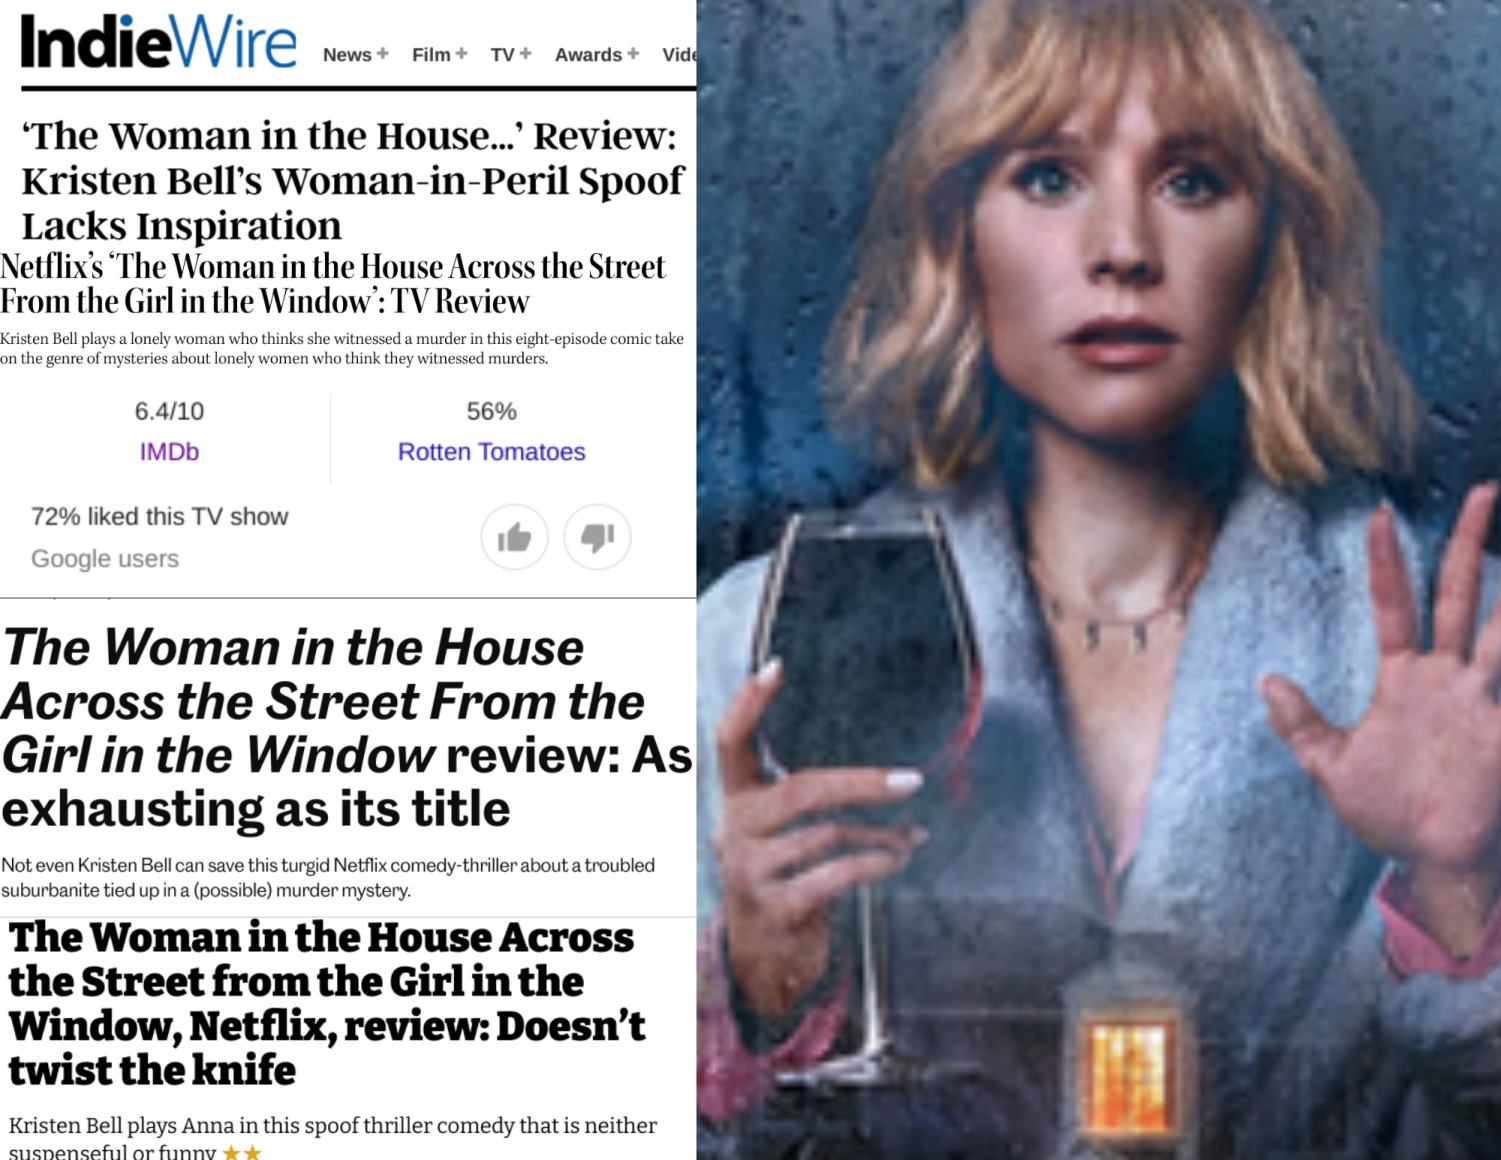 The woman in the House across the Street from the girl in the Window. The woman in the House across the Street from the girl in the Window poster. The woman across